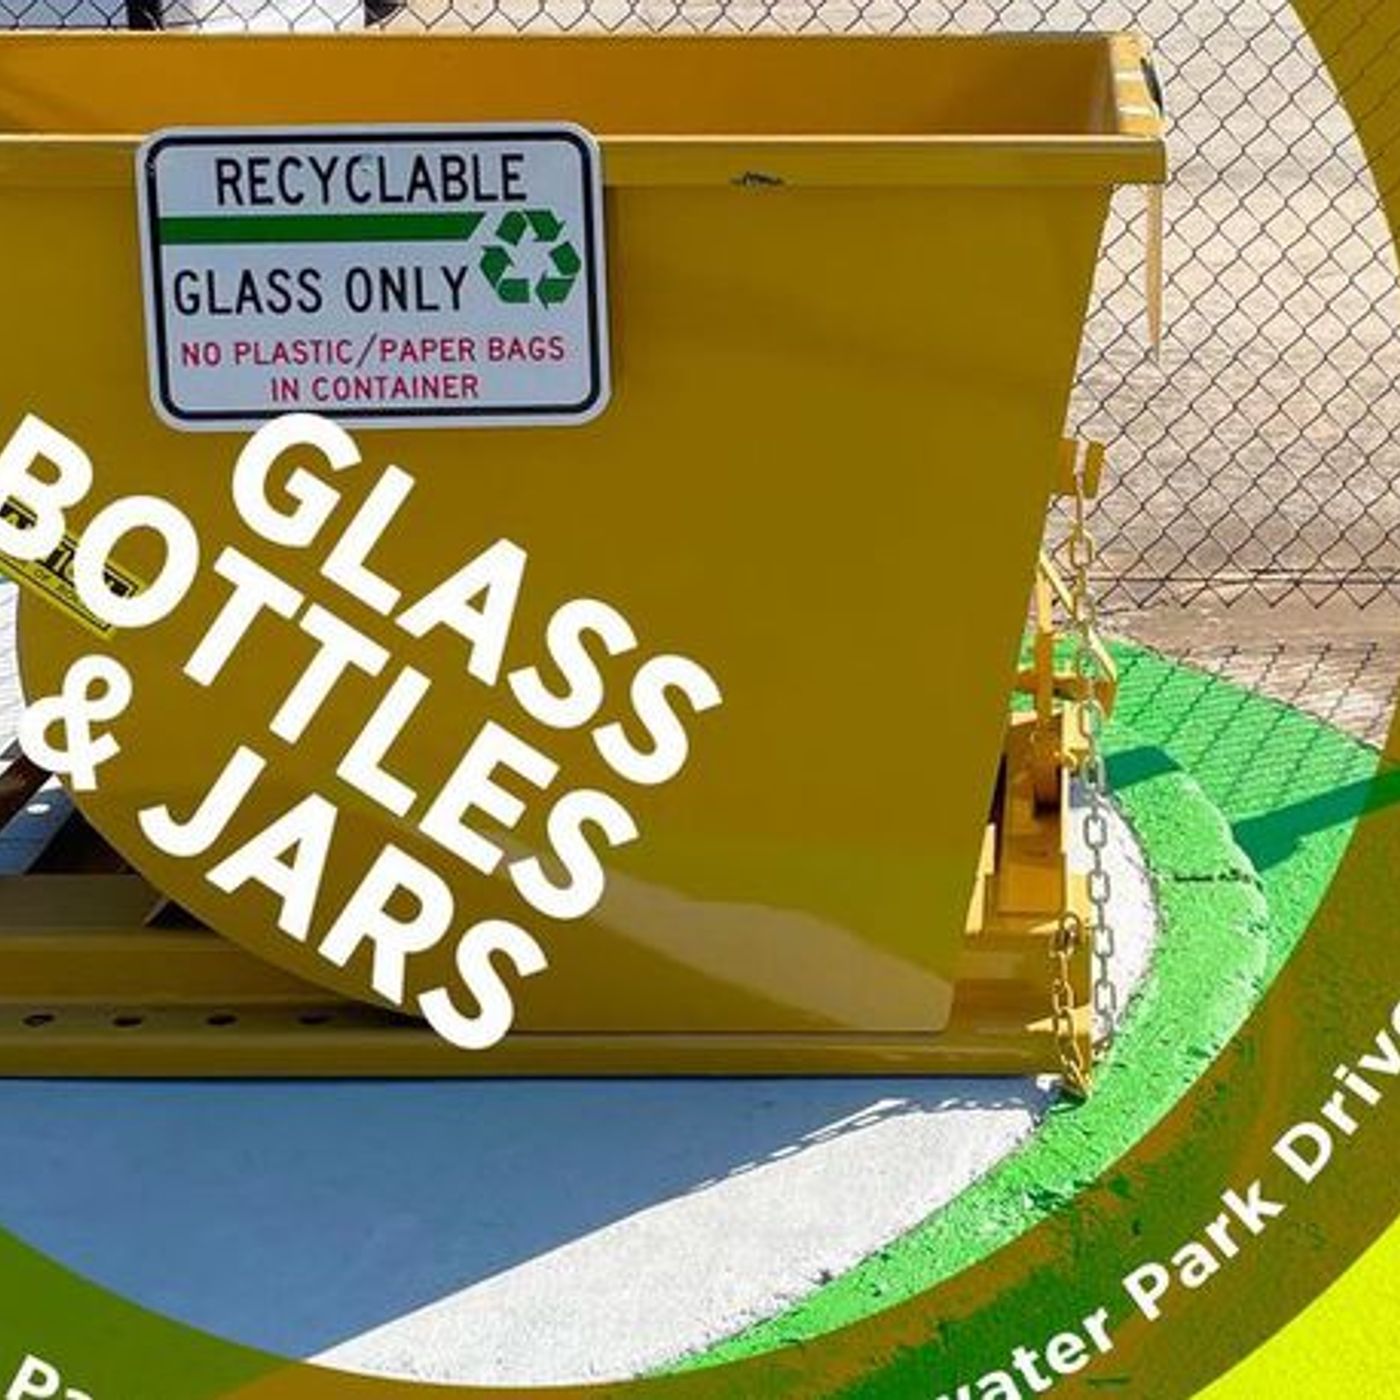 Glass Recycling Now Available In Suwanee Monday-Friday